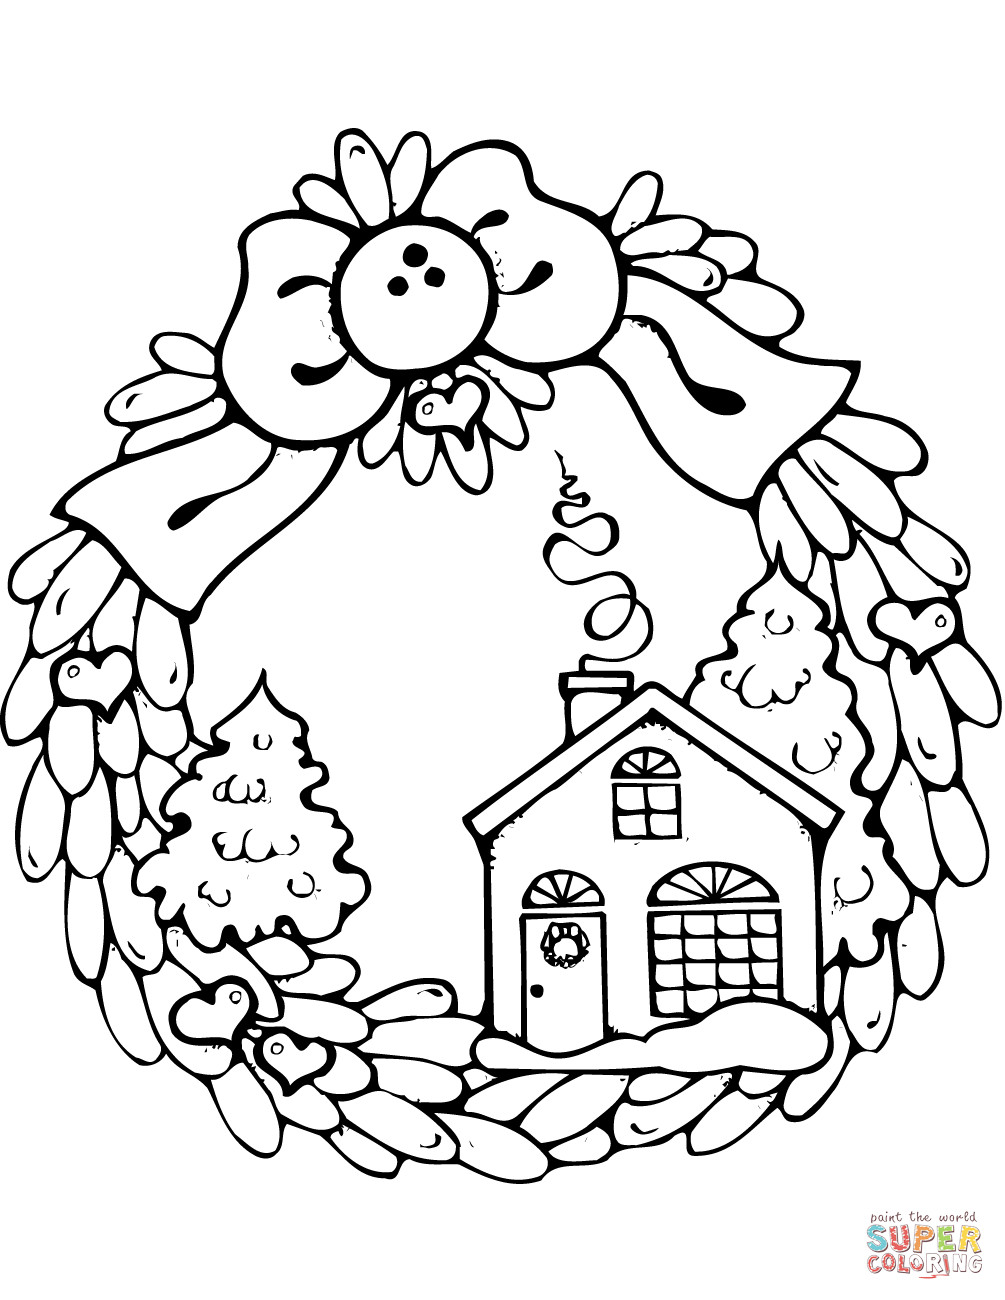 Christmas Wreath Coloring Pages
 Christmas Wreath with Gingerbread House coloring page